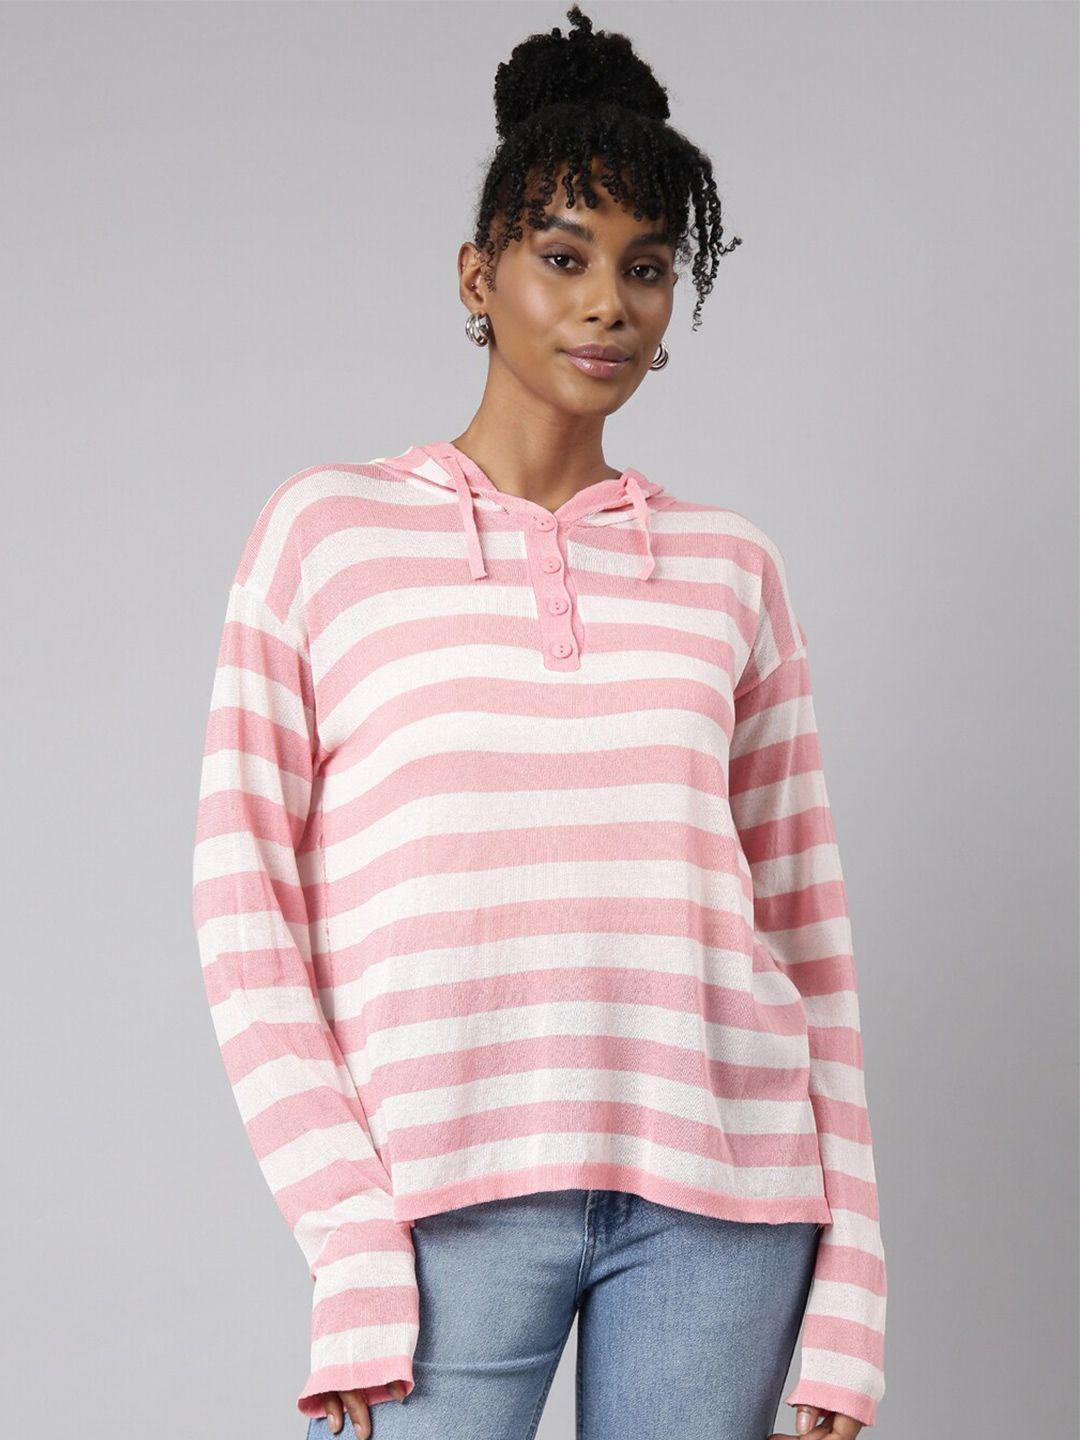 showoff long sleeves striped hood shirt style top